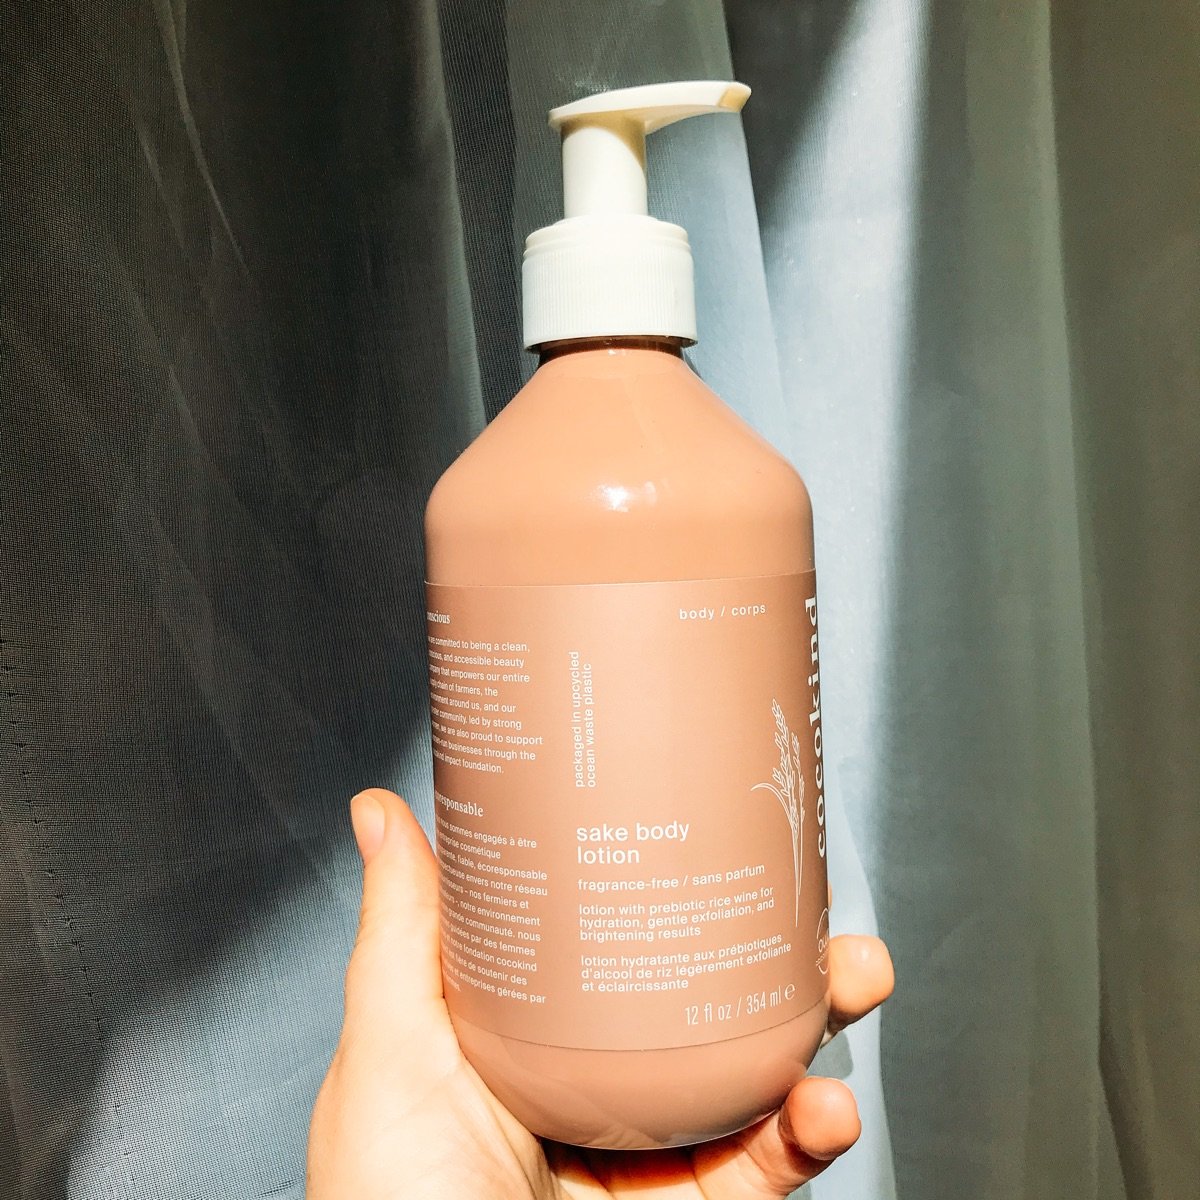 cocokind Sake Body Lotion Review | abillion